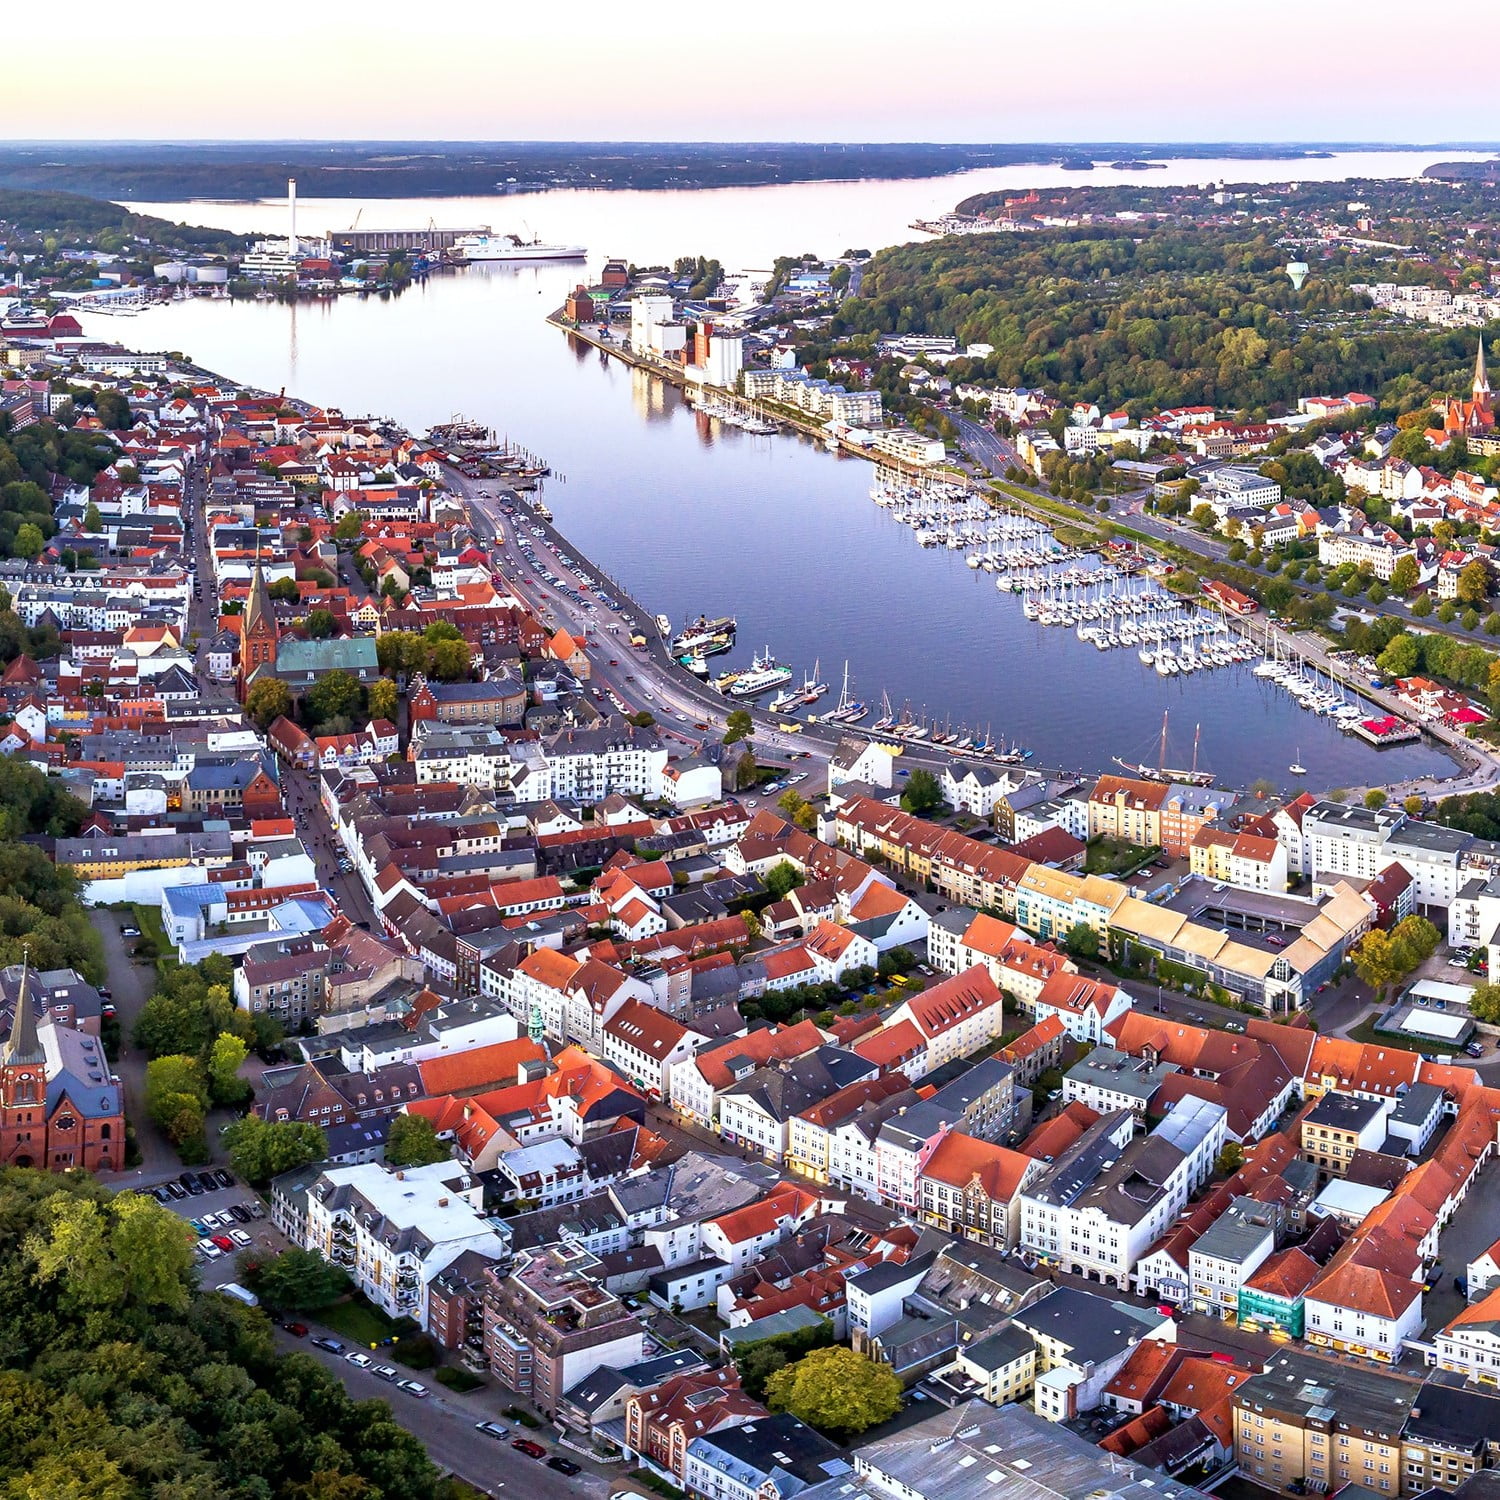 Stadtwerke Flensburg and Innargi A/S to explore potential for geothermal energy